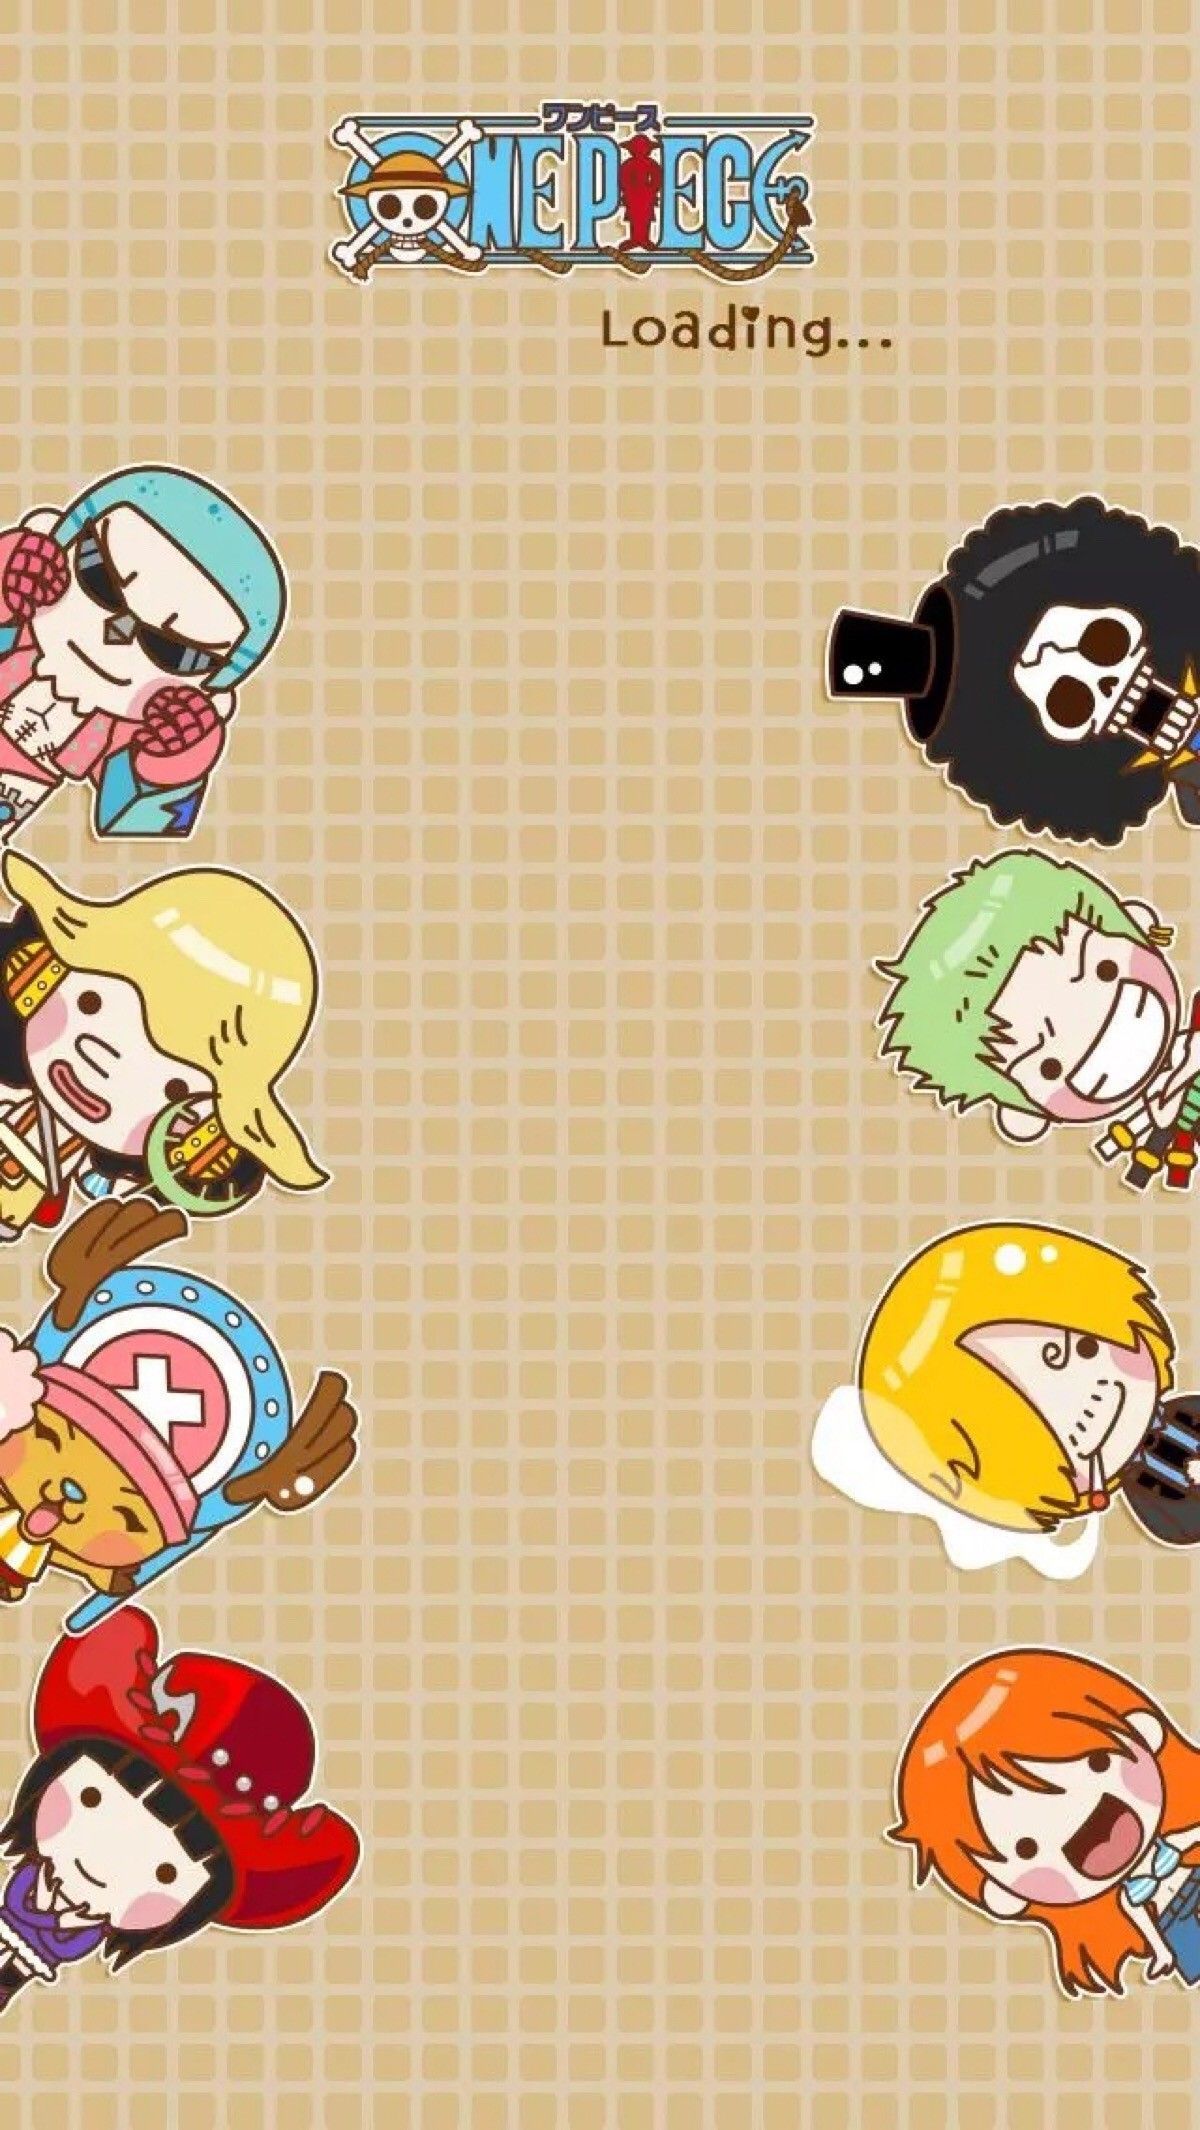 Wallpaper One Piece iPhone 5s One Piece Chibi Wallpapertag iPhone 5s Wallpaper One P. One piece wallpaper iphone, One piece fanart, One piece cartoon